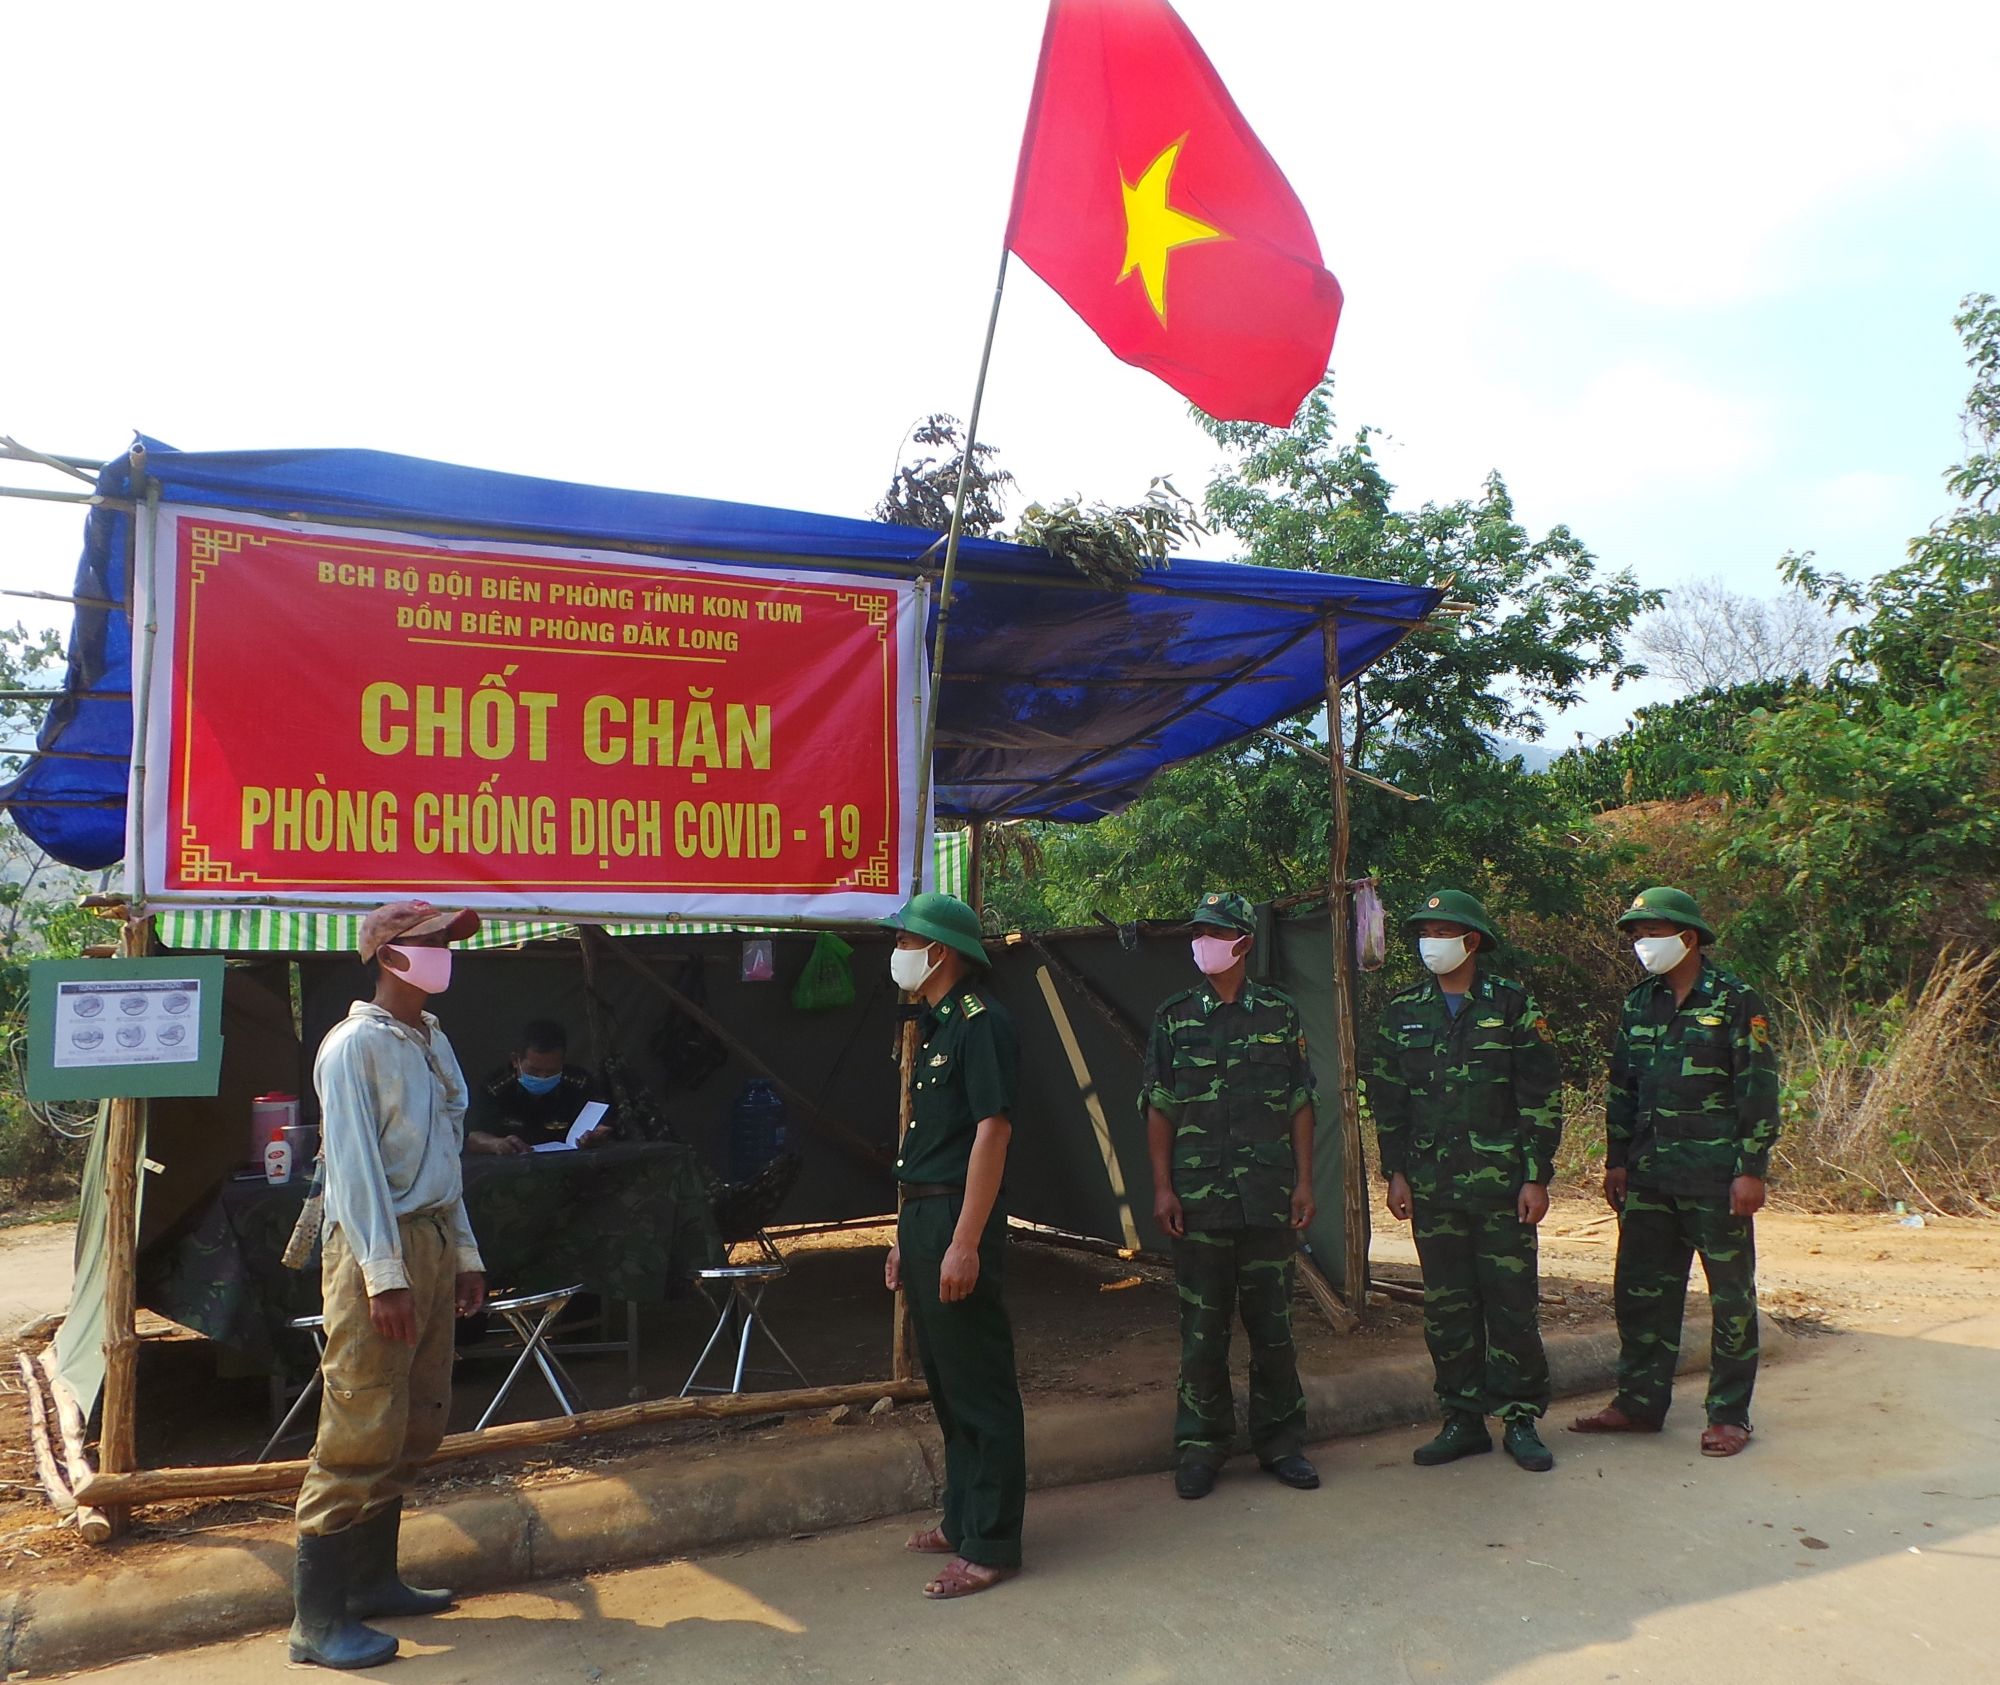 Soldiers of the Dak Long border guard post in Dak Glei district, the Central Highlands province of Kon Tum, give disease prevention guidance to a local resident (Photo: VNA)